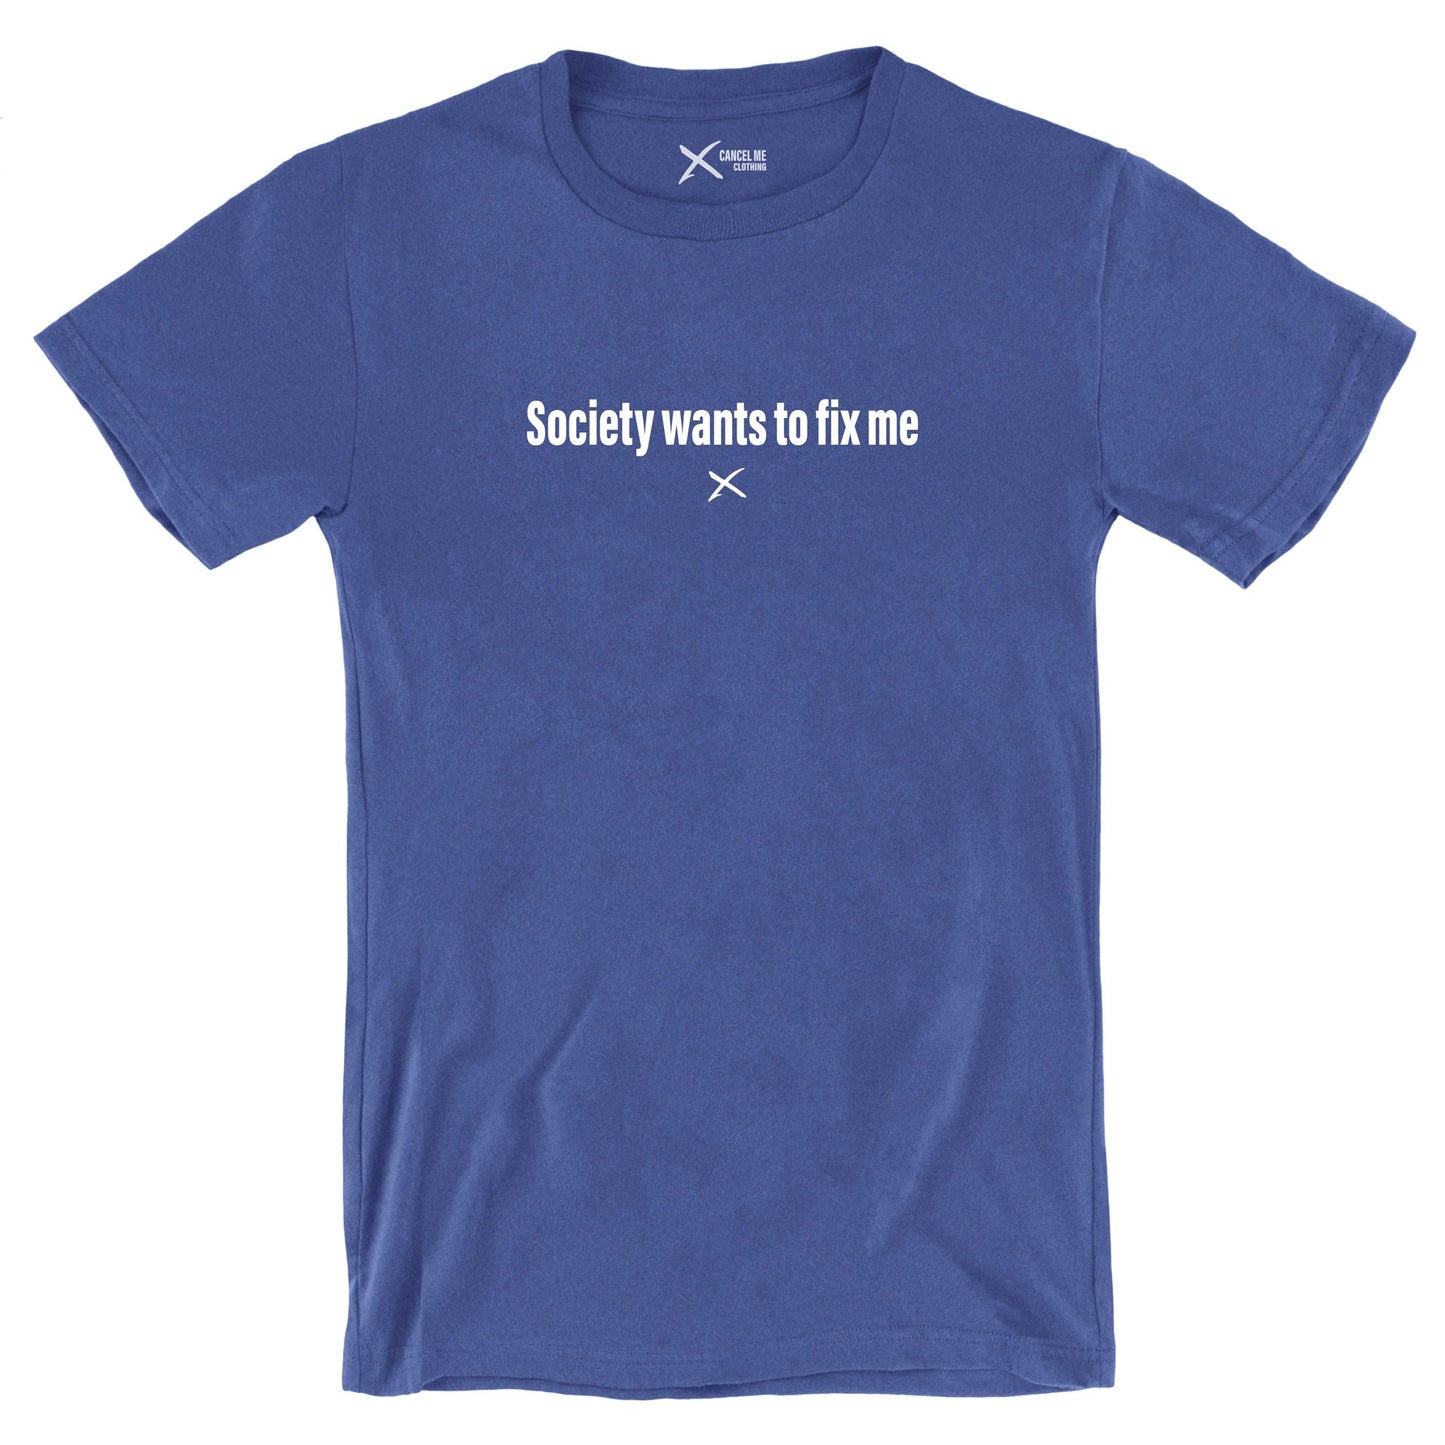 Society wants to fix me - Shirt